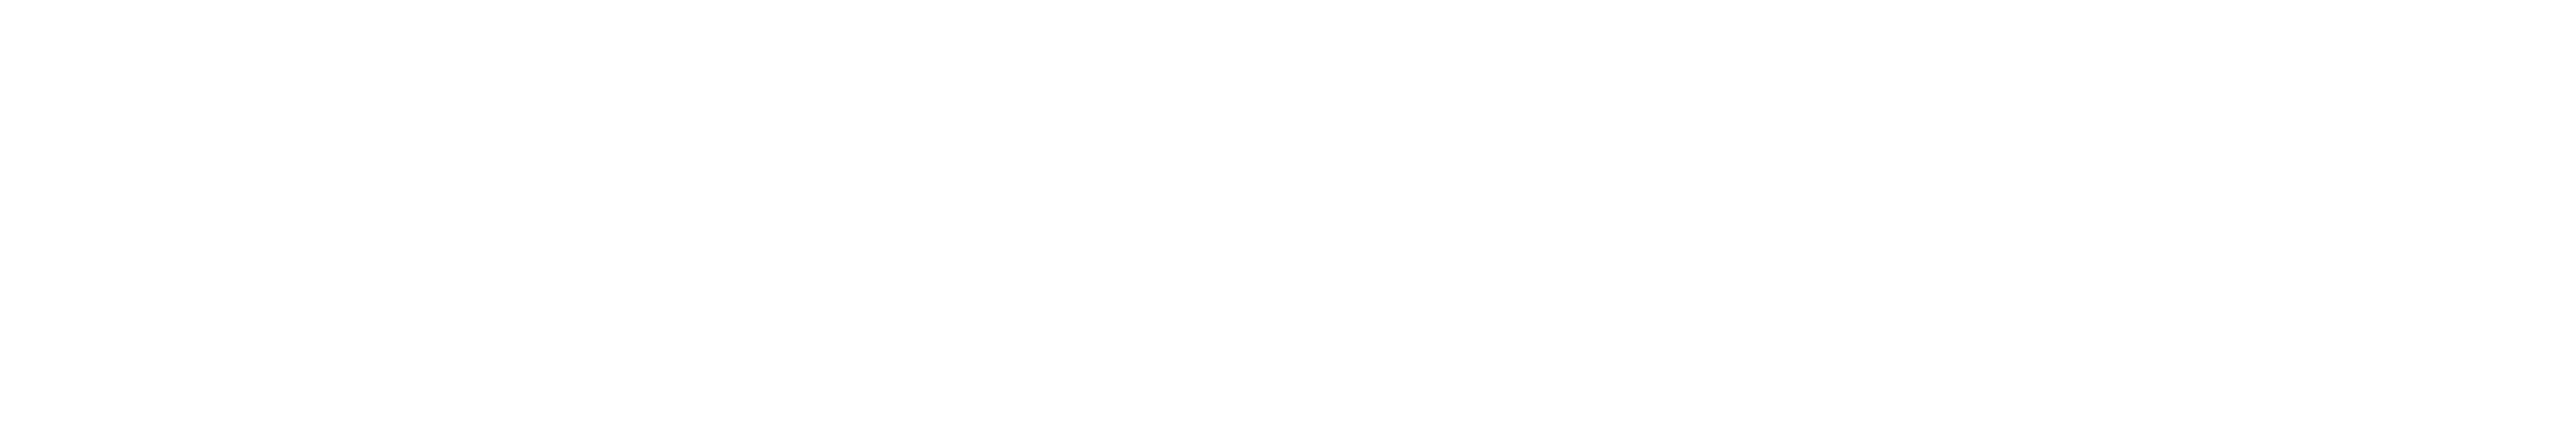 logo-combonianos-white.png